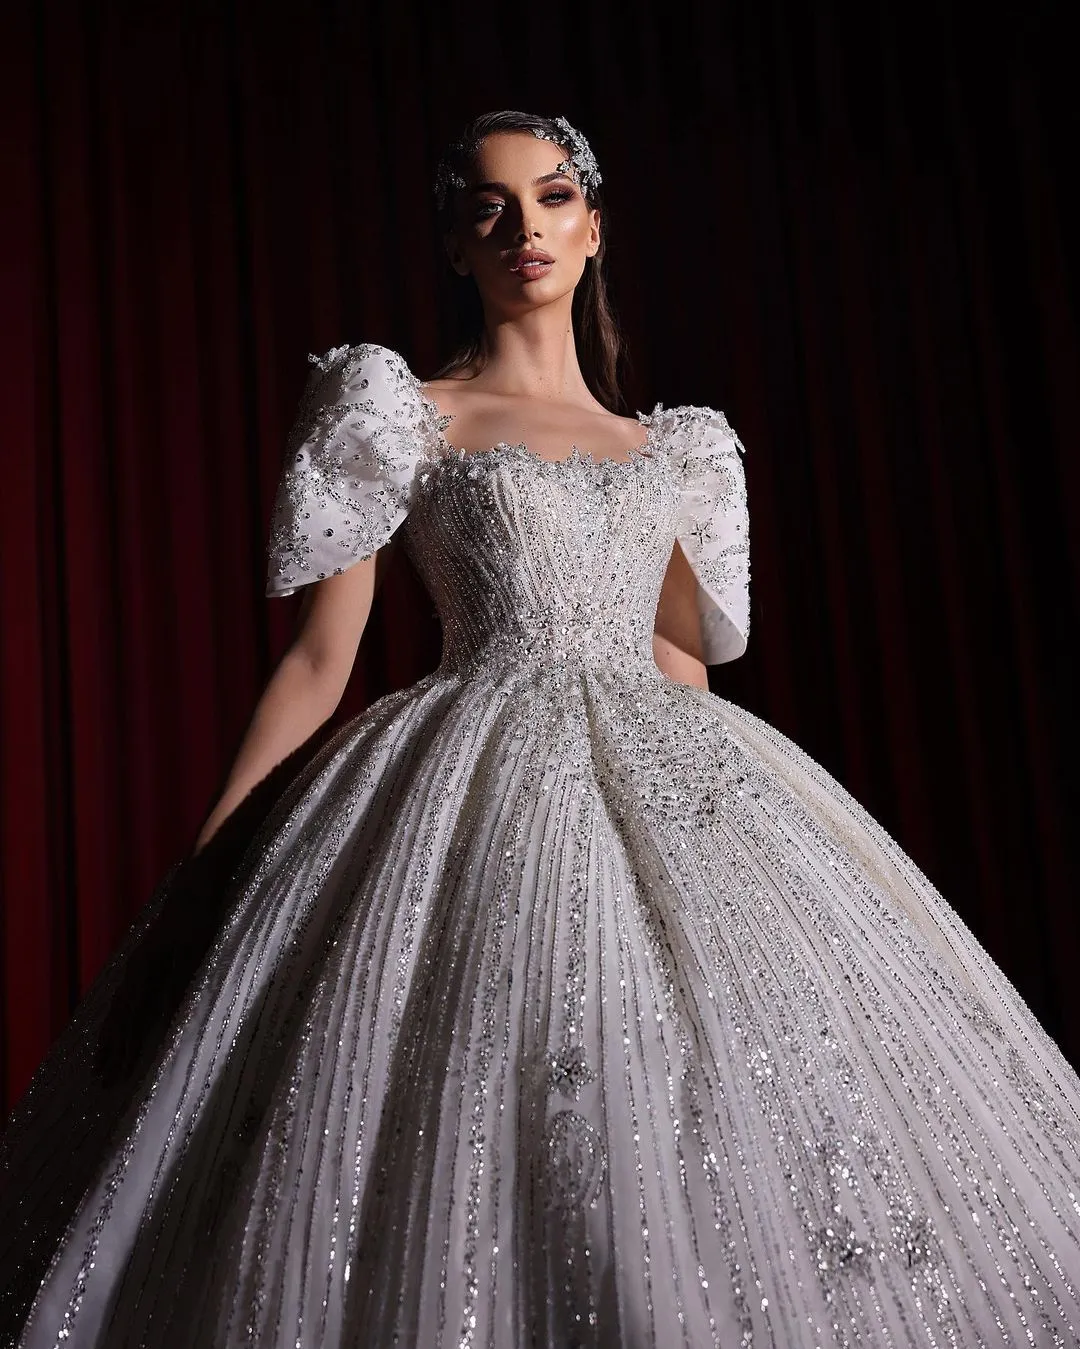 Luxurious Ball Gown Wedding Dresses Square Short Sleeves Shining Beading Applicant Layered Stain Tulle Chapel Gown Custom Made Bridal Dress Vestidos De Novia